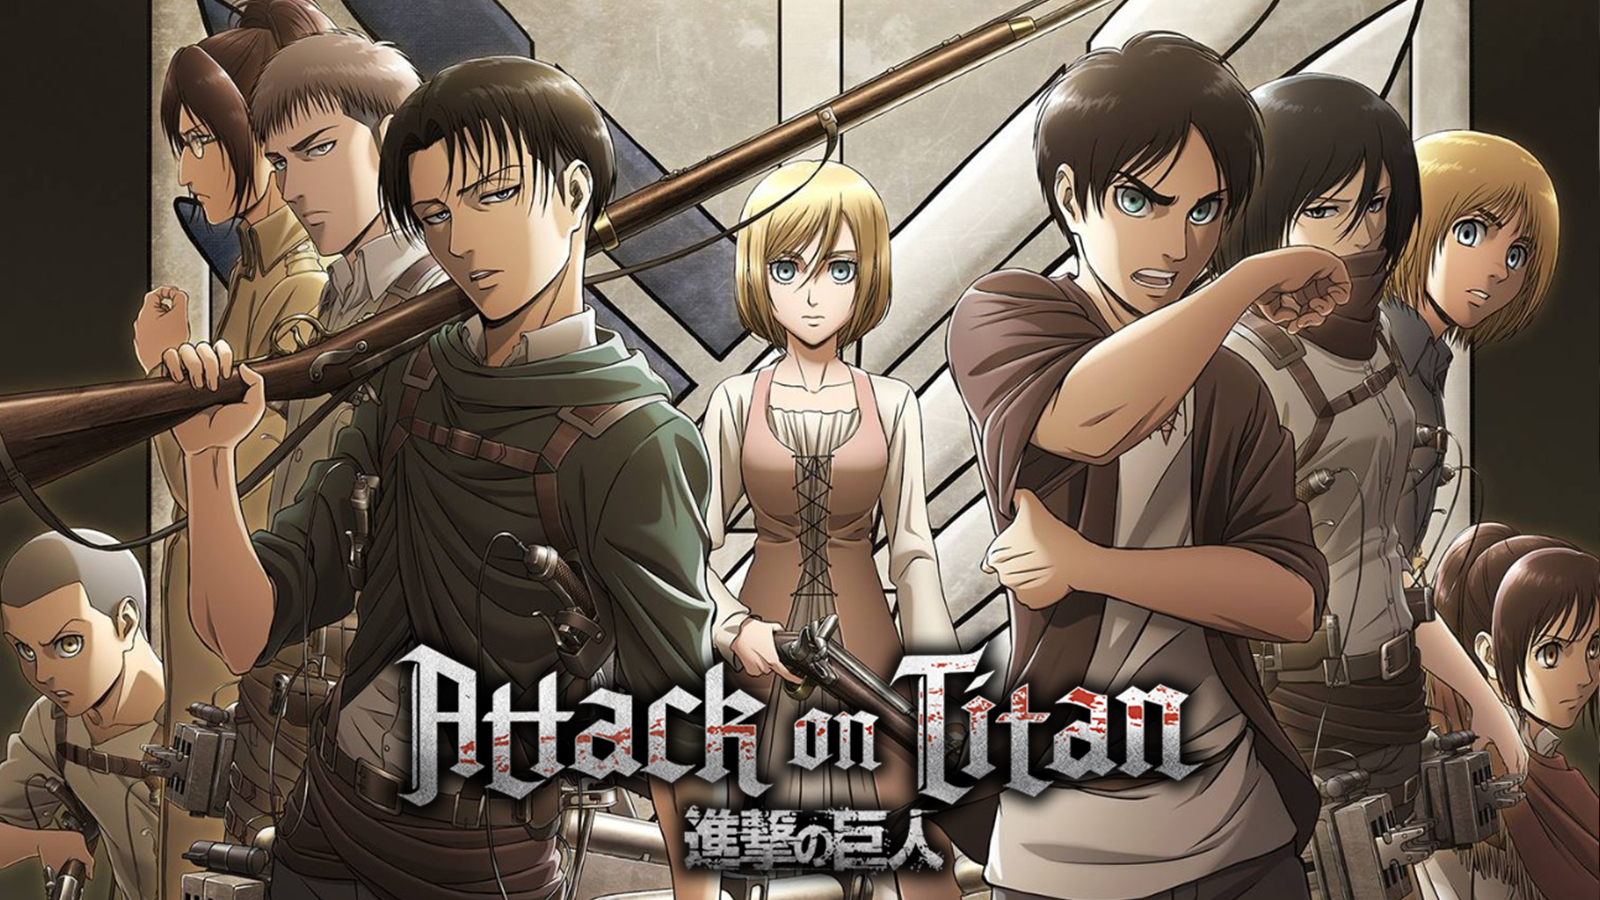 Attack on Titan Season 4 trailer gives first look at humanity's final battle